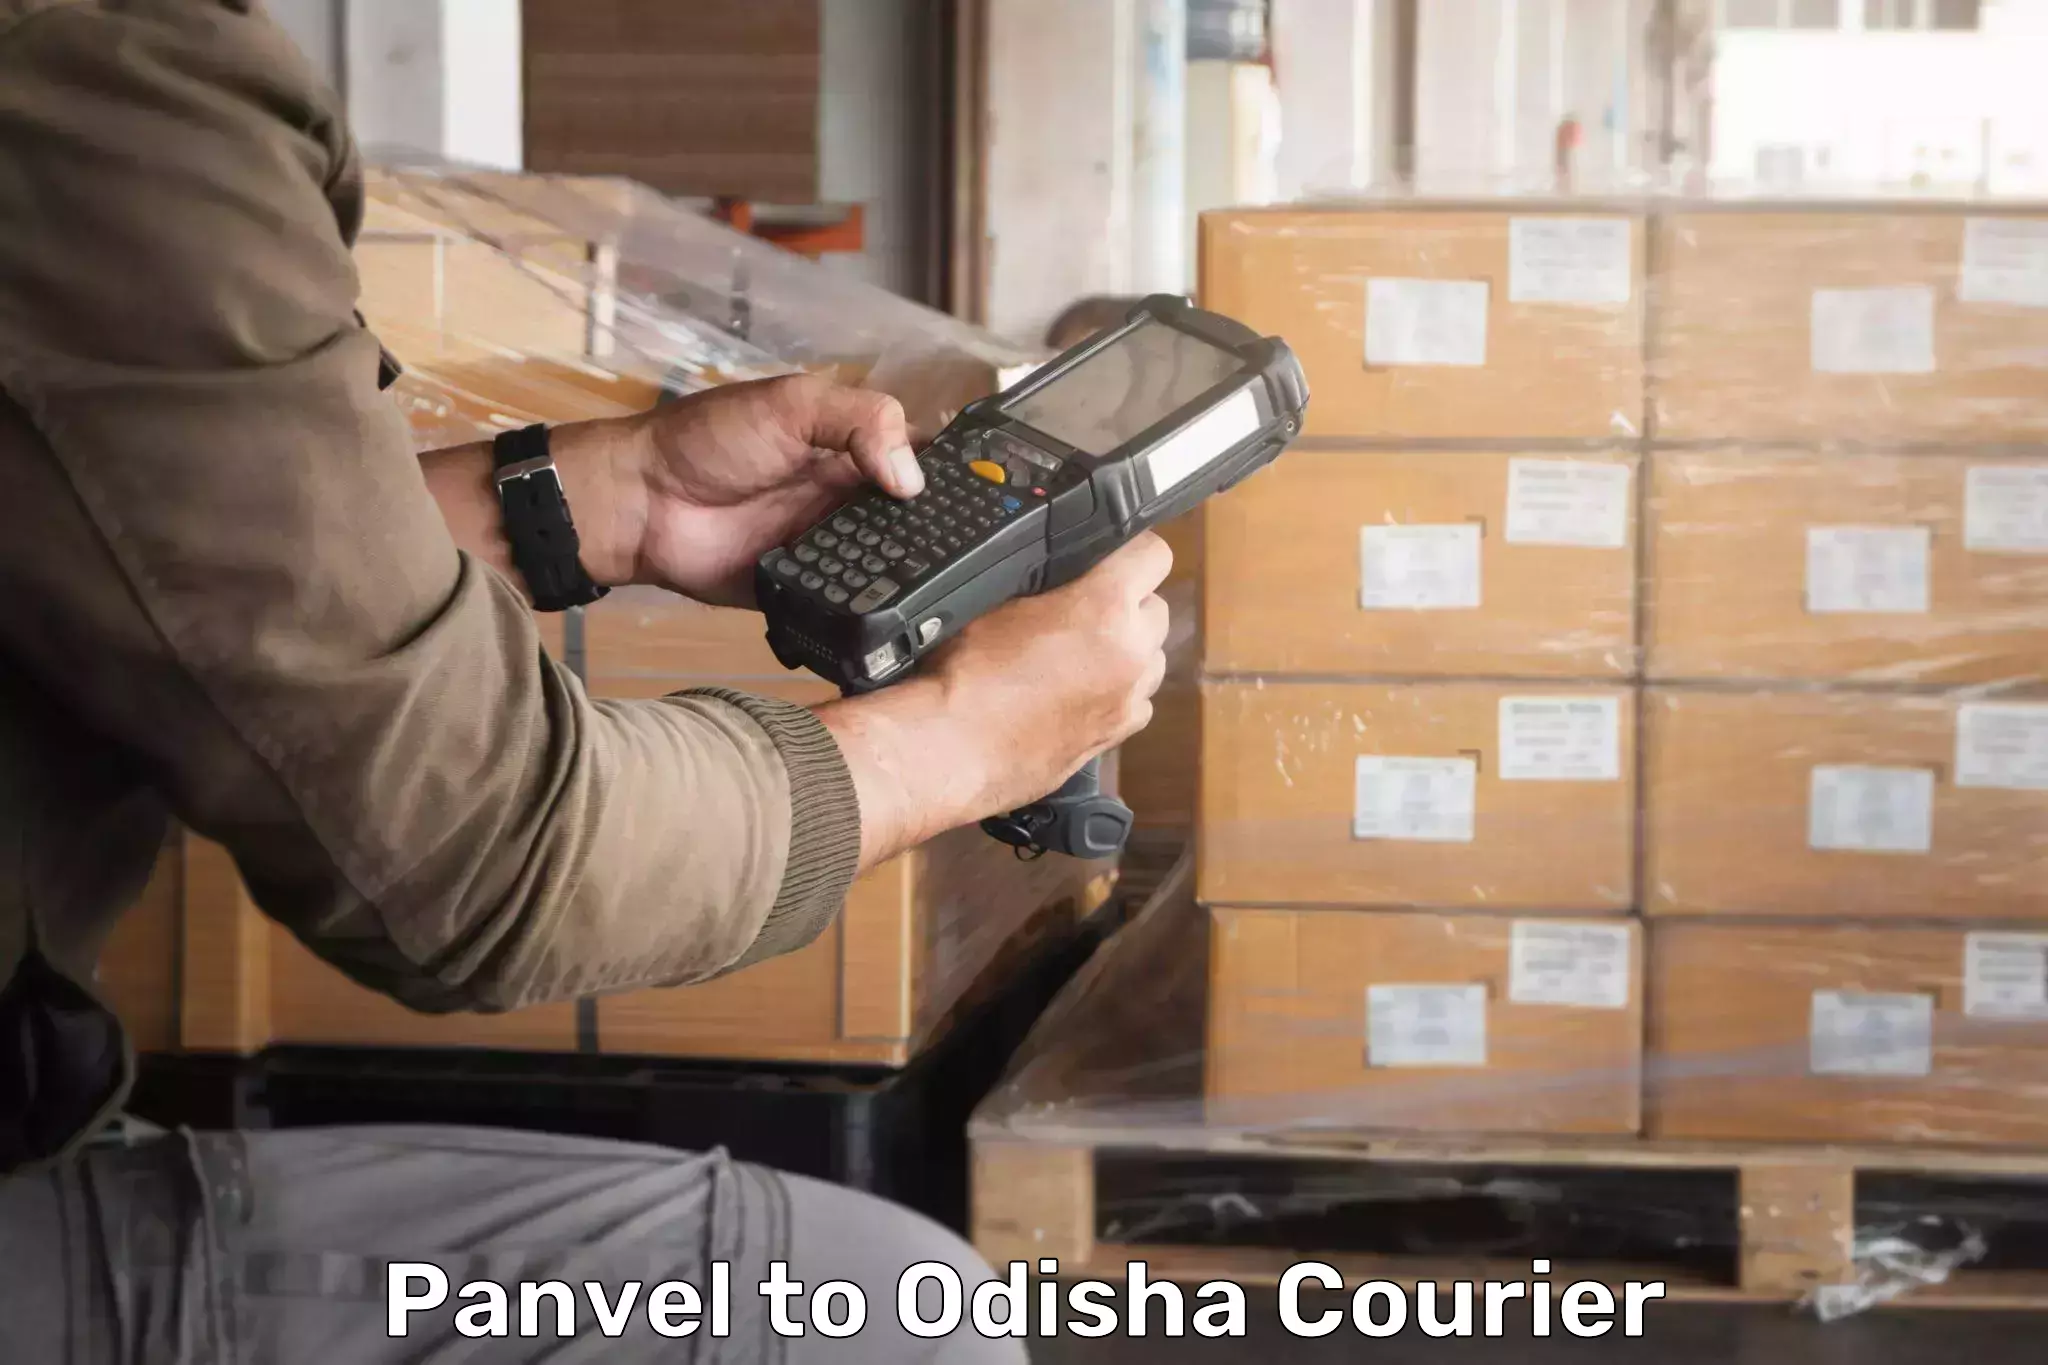 State-of-the-art courier technology Panvel to Dunguripali